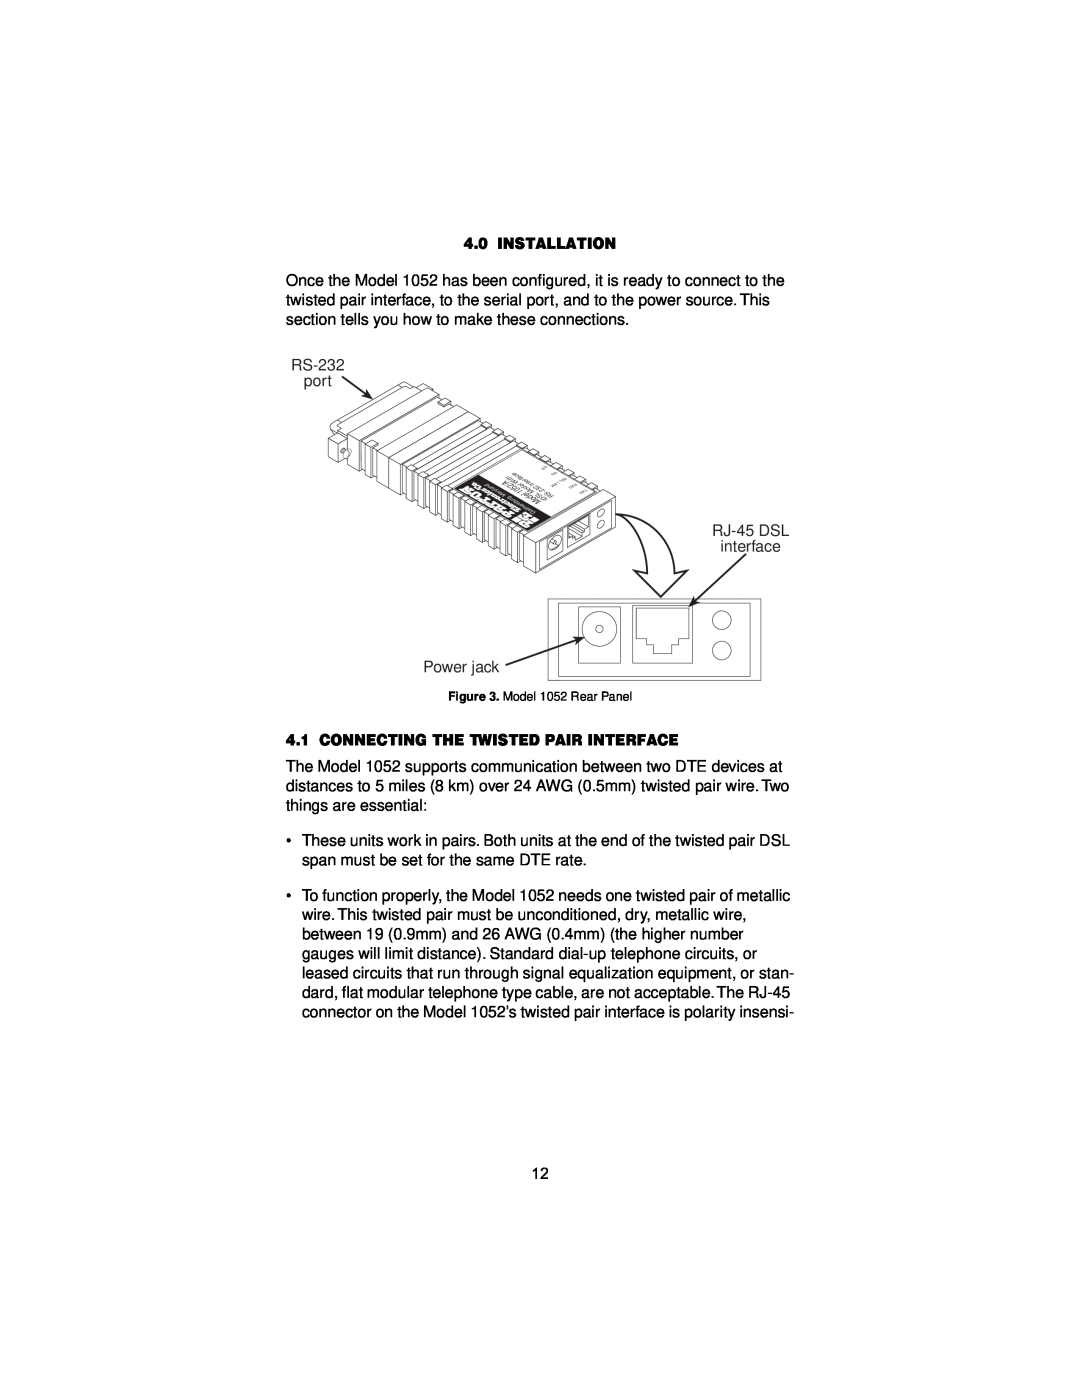 Patton electronic 1052 user manual Installation, Connecting The Twisted Pair Interface 